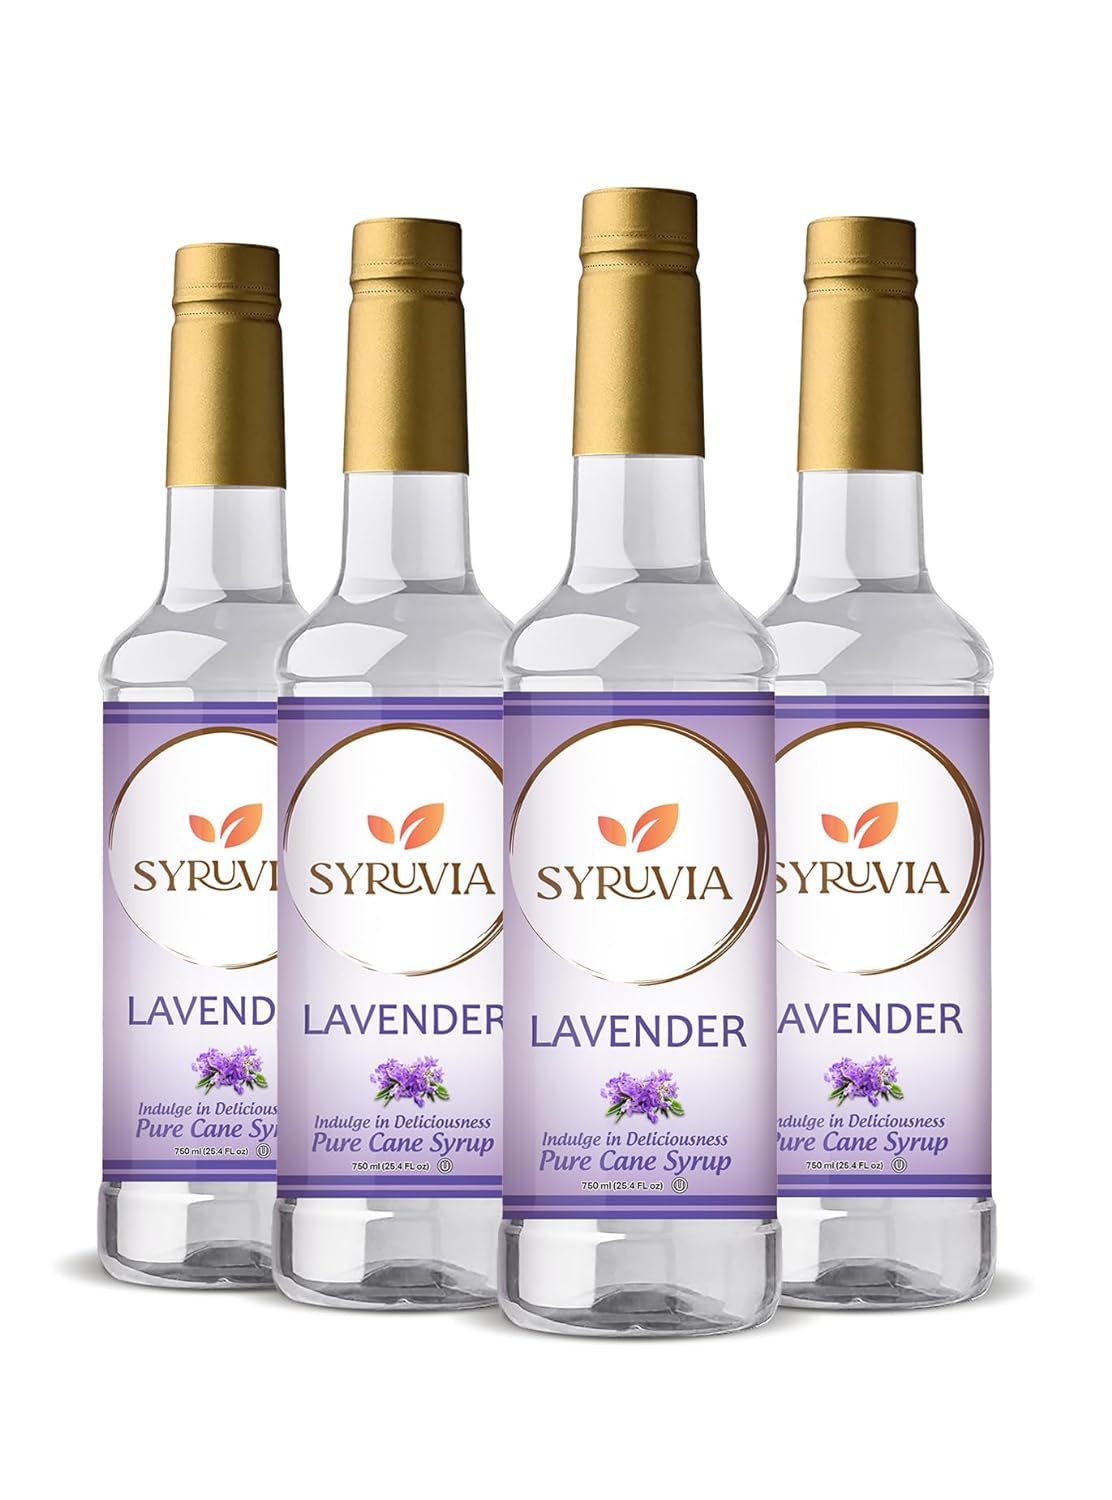 syrup Syruvia Lavender Syrup for Coffee – Fragrant Lavender Coffee Syrup Flavor, 25.4 fl oz, Kosher, Gluten Free, Perfect for Coffee, Cocktails, Drinks, Desserts, and More, No Coloring (4 Pack)